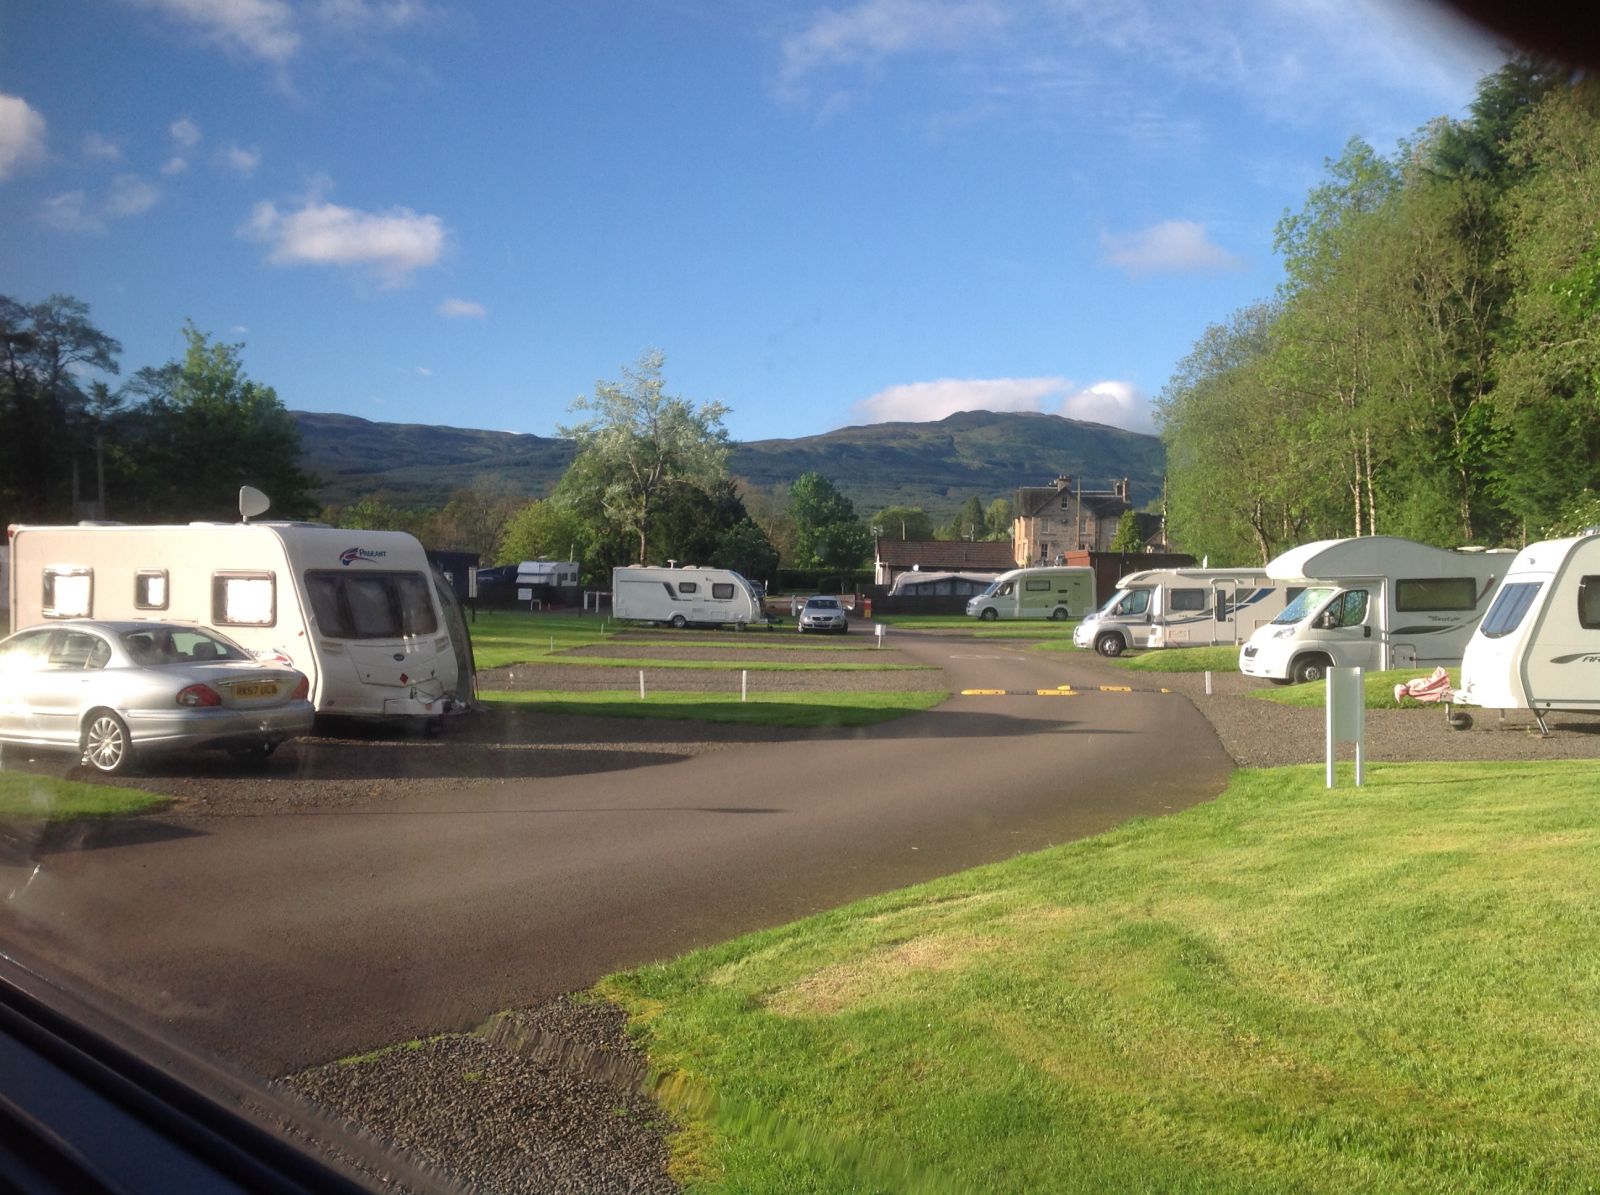 Try to find like minded people to talk to about owning a motorhome